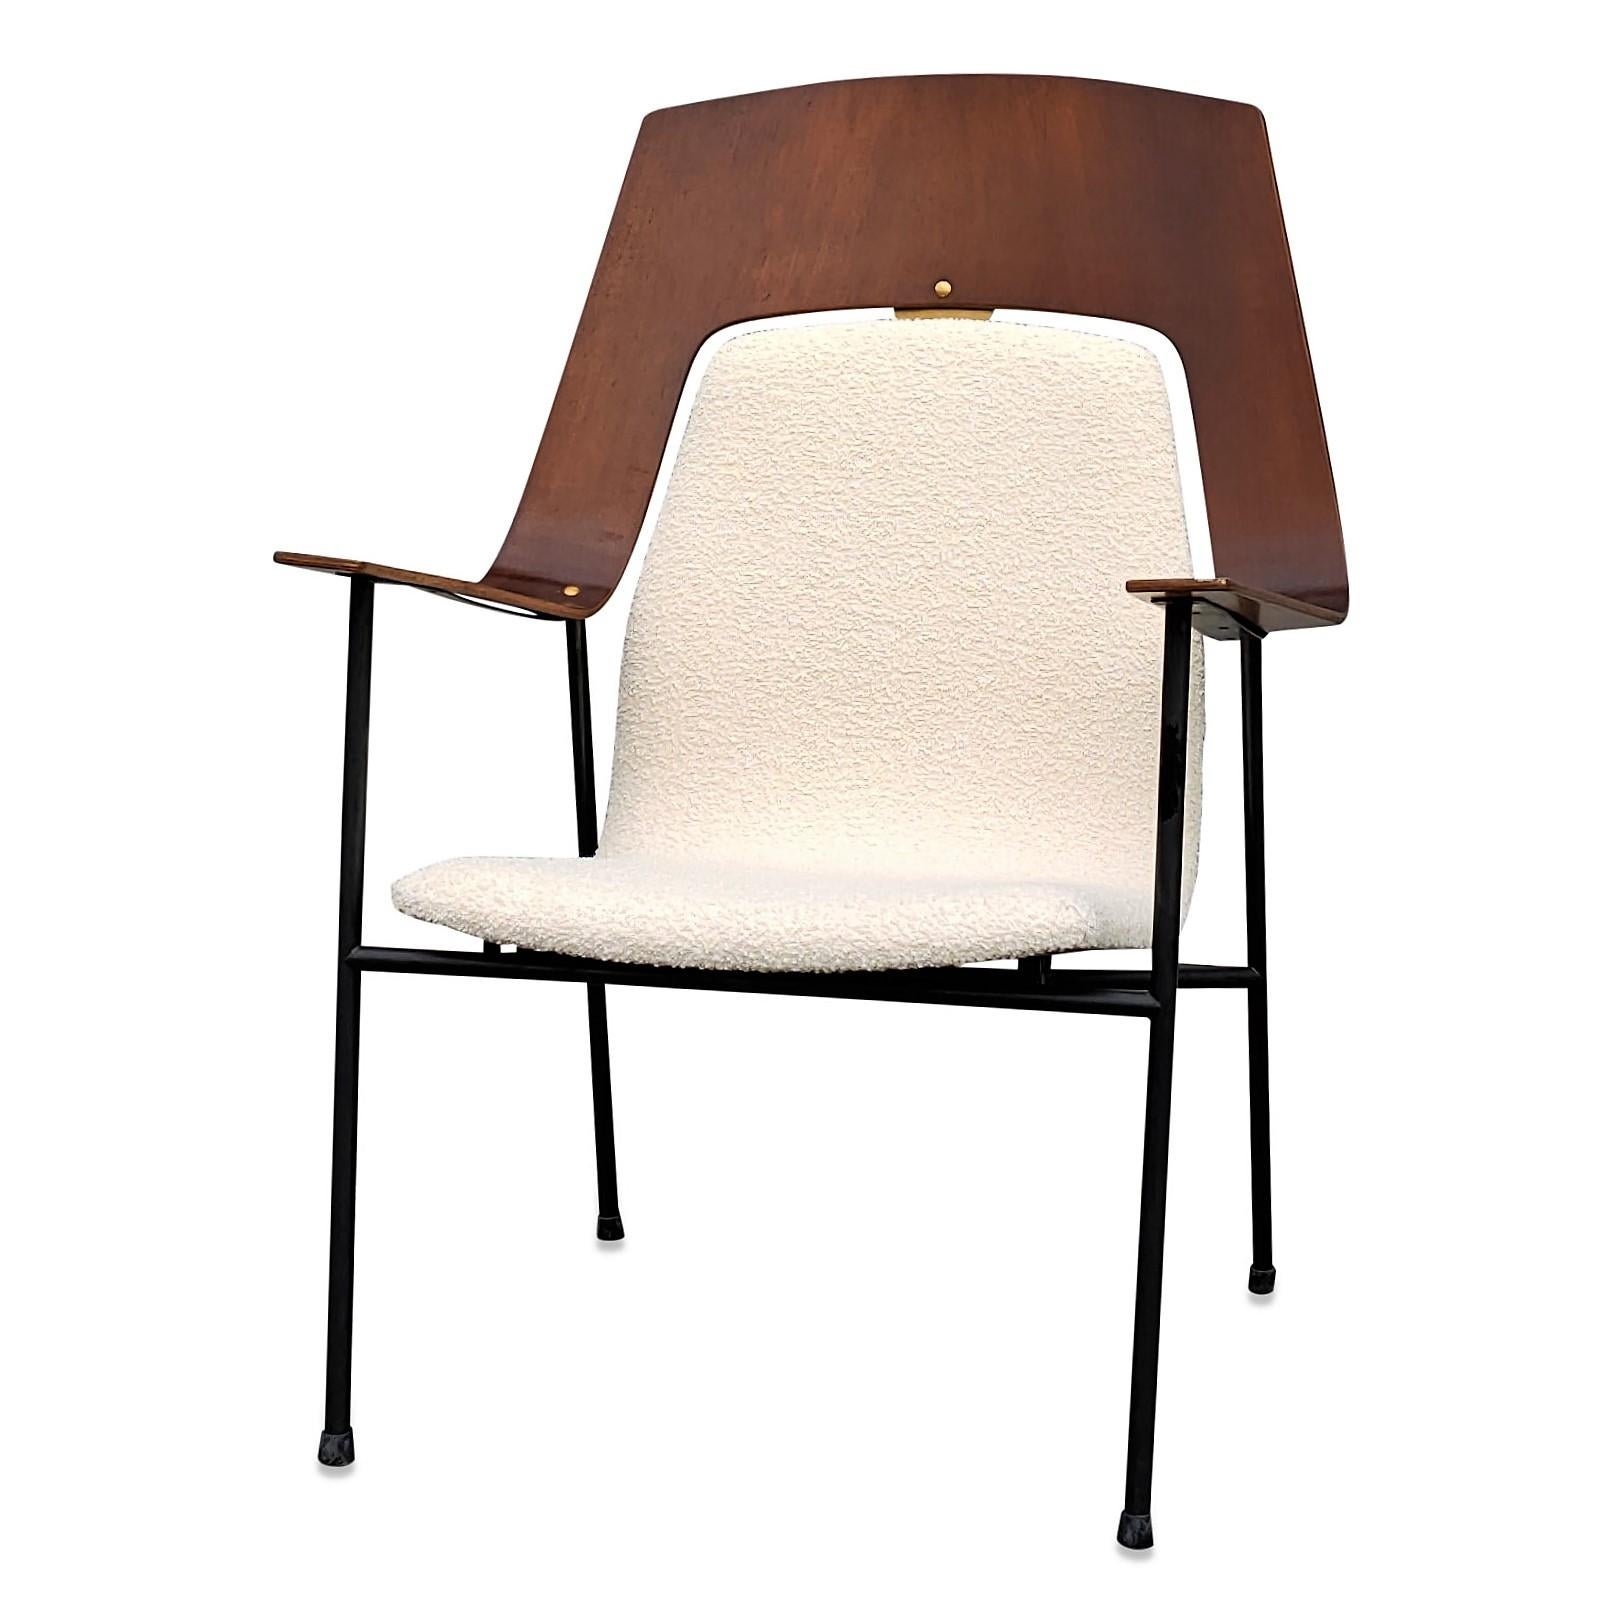 British Midcentury Plywood and Cream White Armchair Attributed Robin Day, UK, 1960s For Sale